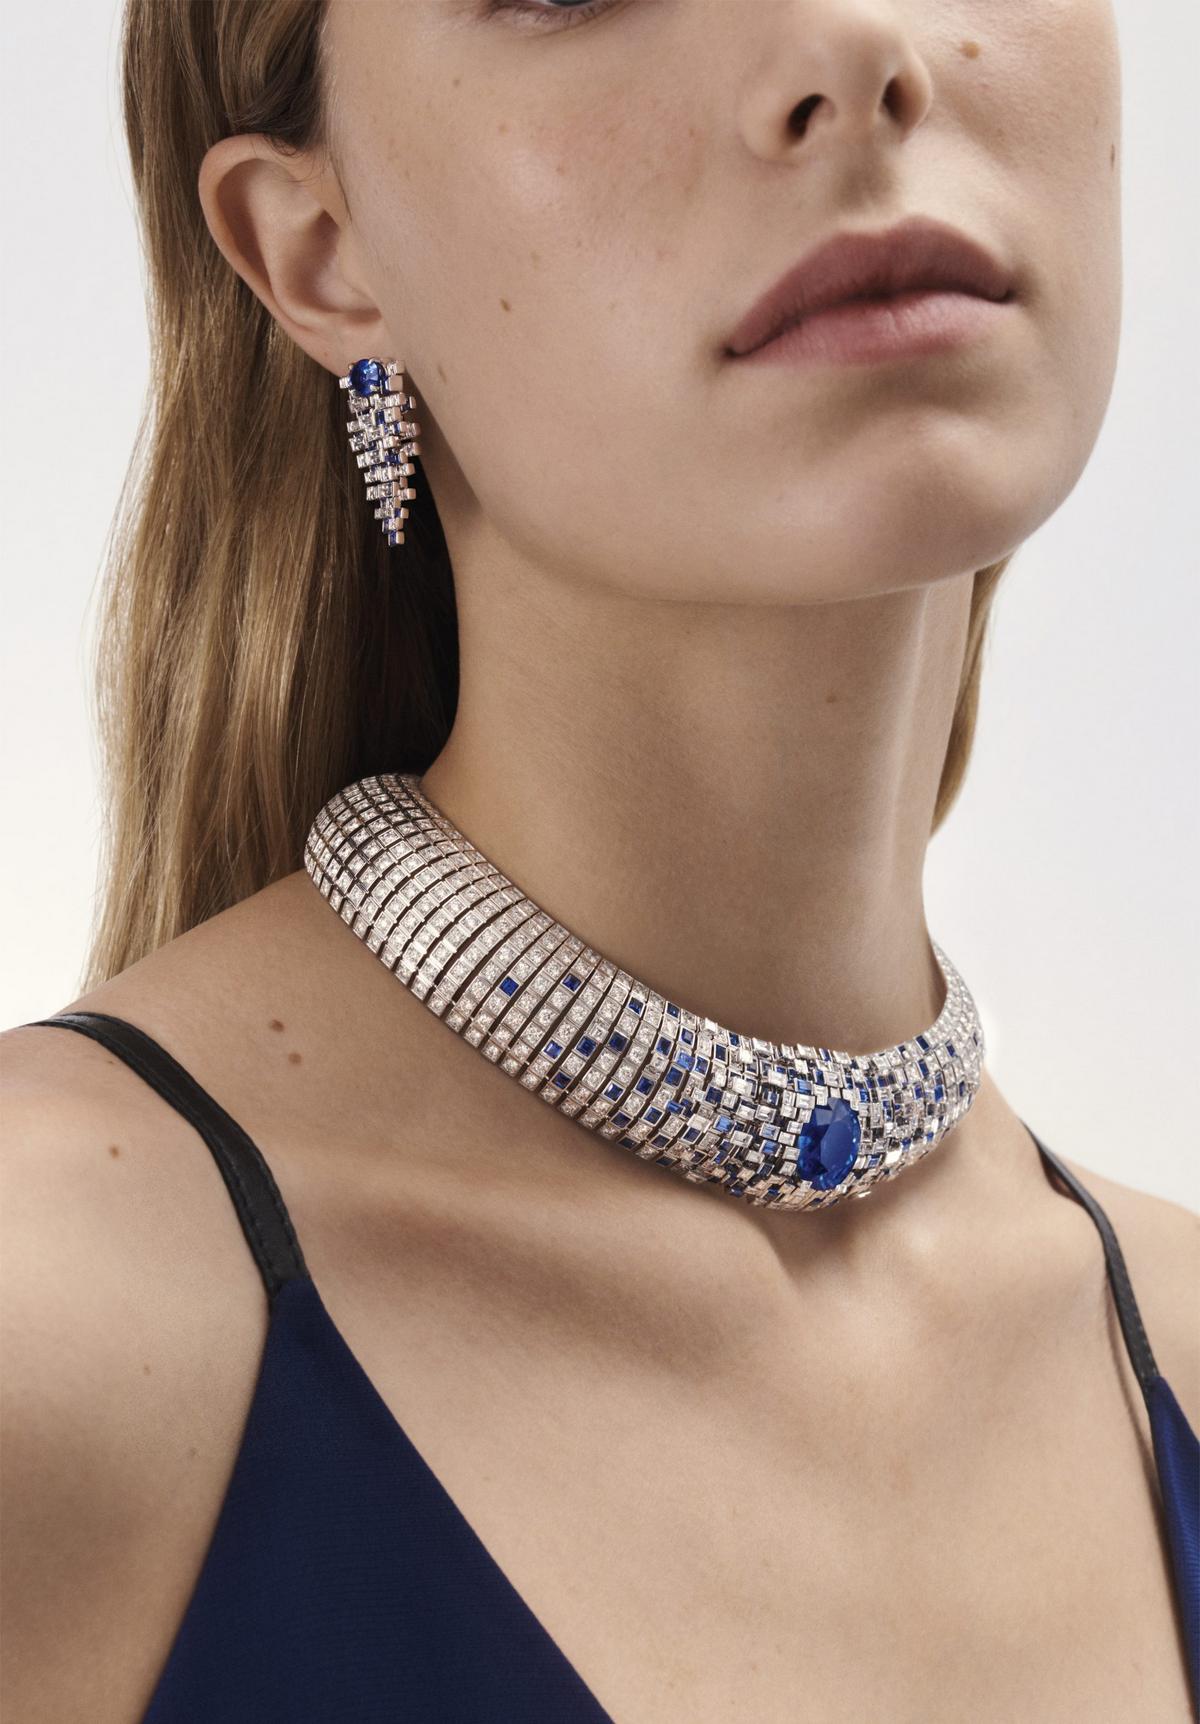 Louis Vuitton High Jewelry Reaches New Heights at the MoMA Tower